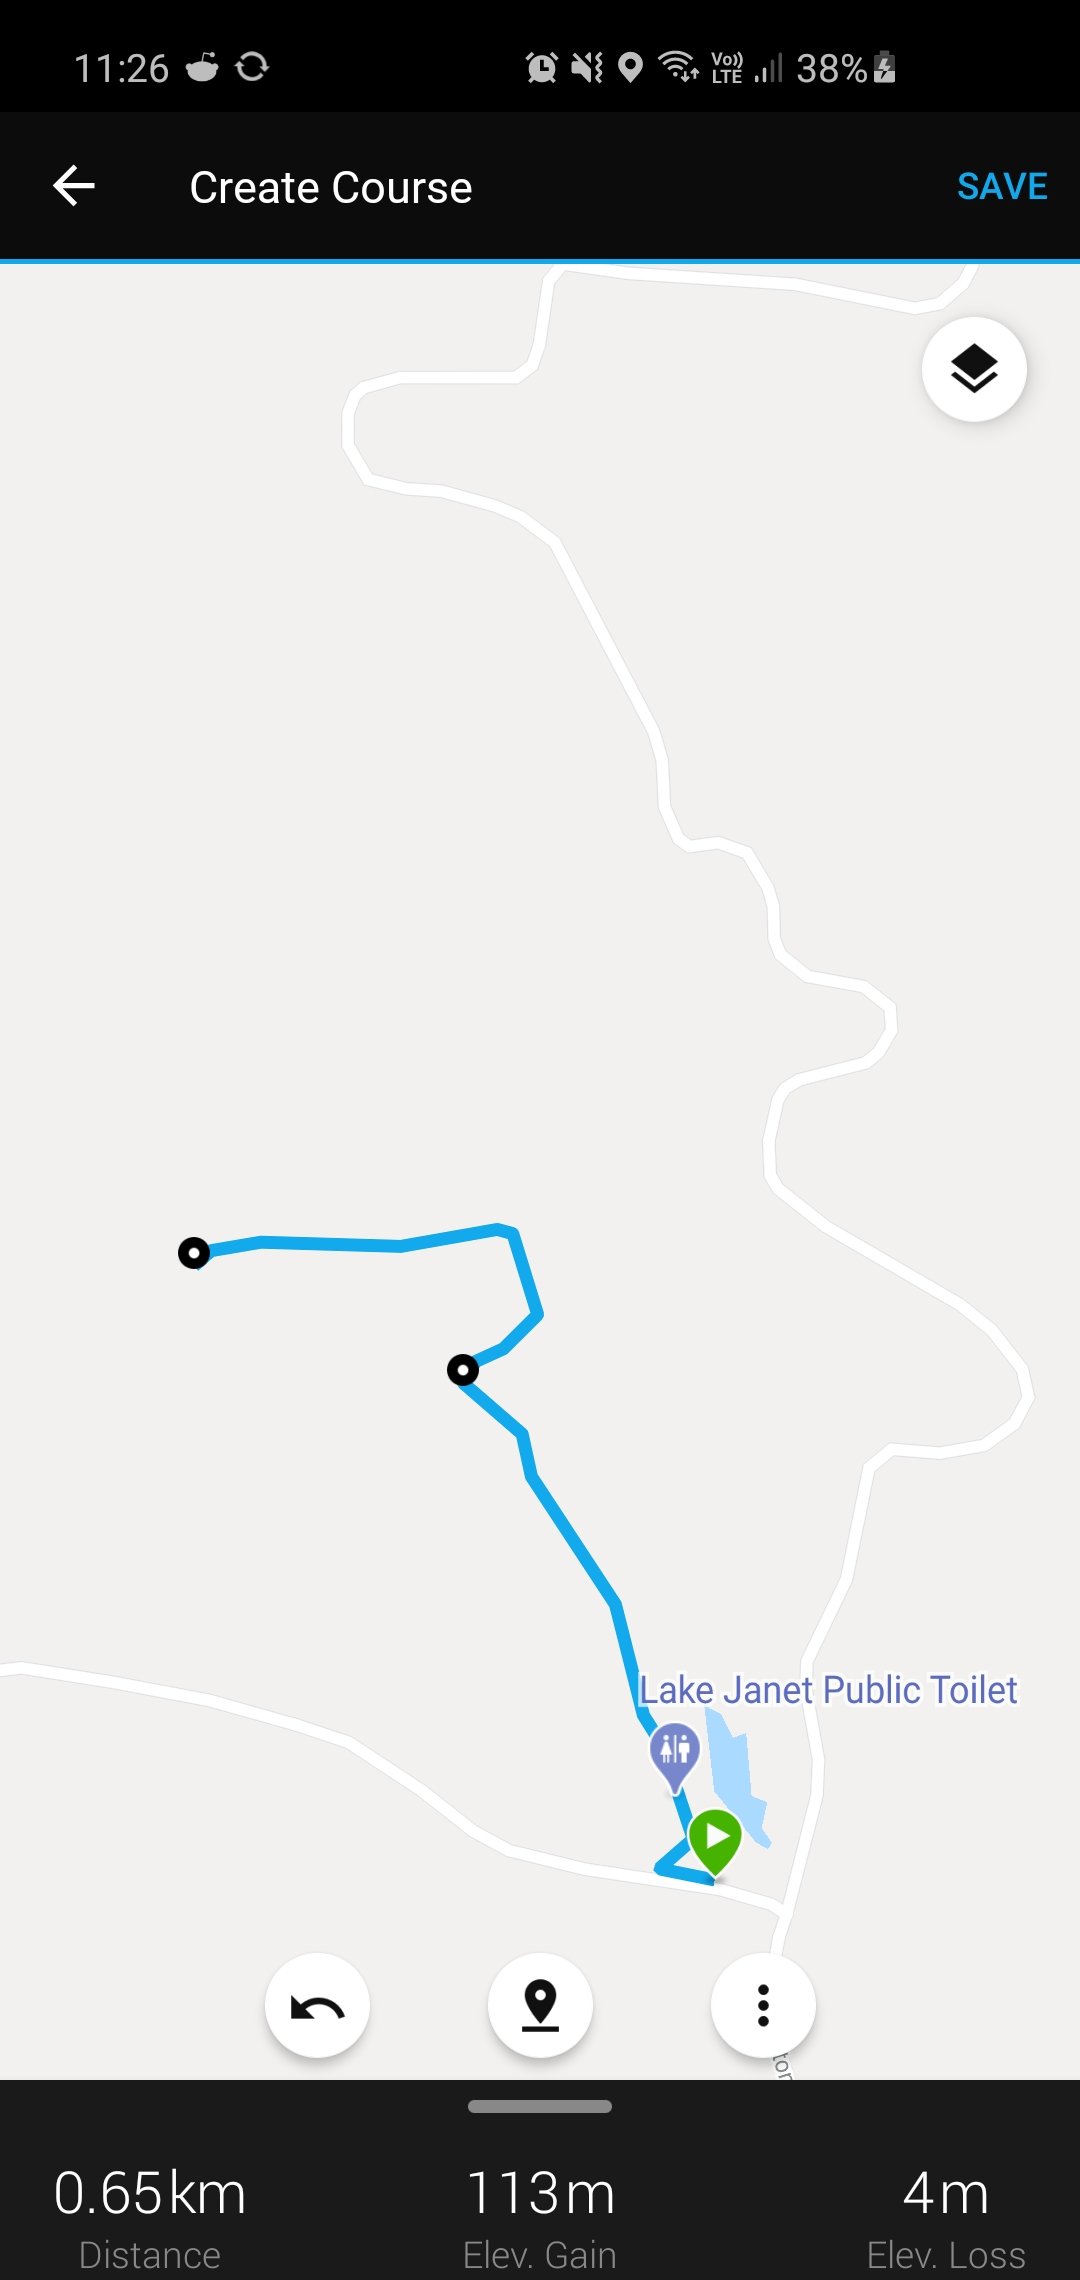 Trails don't display in Garmin Connect courses